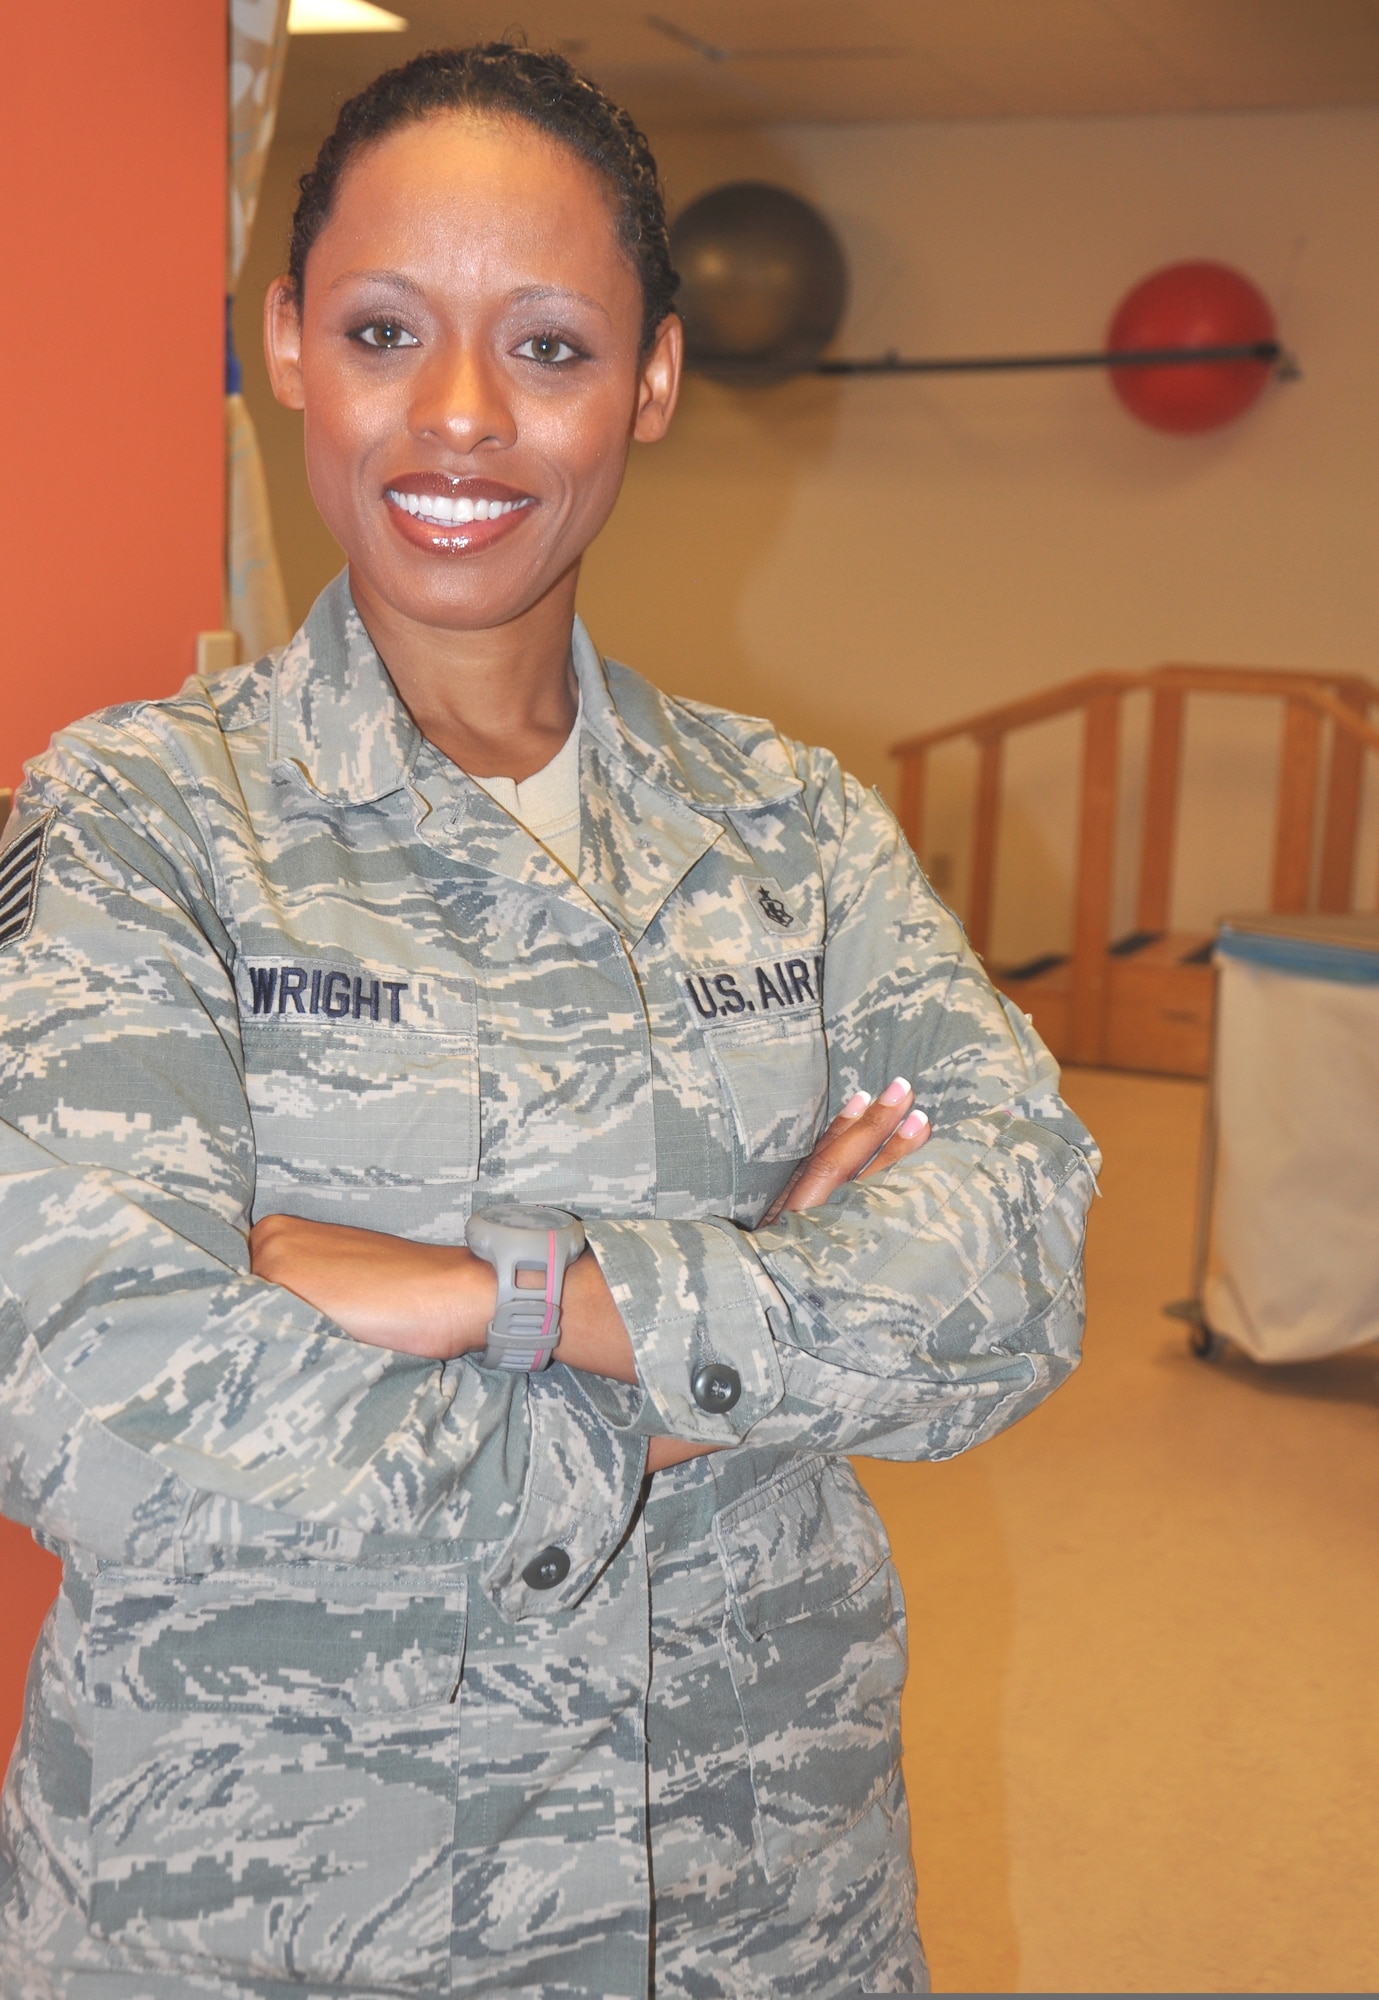 Tech. Sgt. Michelle Wright, 45th Medical Operations Squadron Physical Therapy Technician, was selected for Shark of the Week. Contact the 45th Space Wing Public Affairs office to nominate the next Shark of the Week at 321-494-5933 or email 45swpa@us.af.mil. (U.S. Air Force photo/Heidi Hunt) (Released)